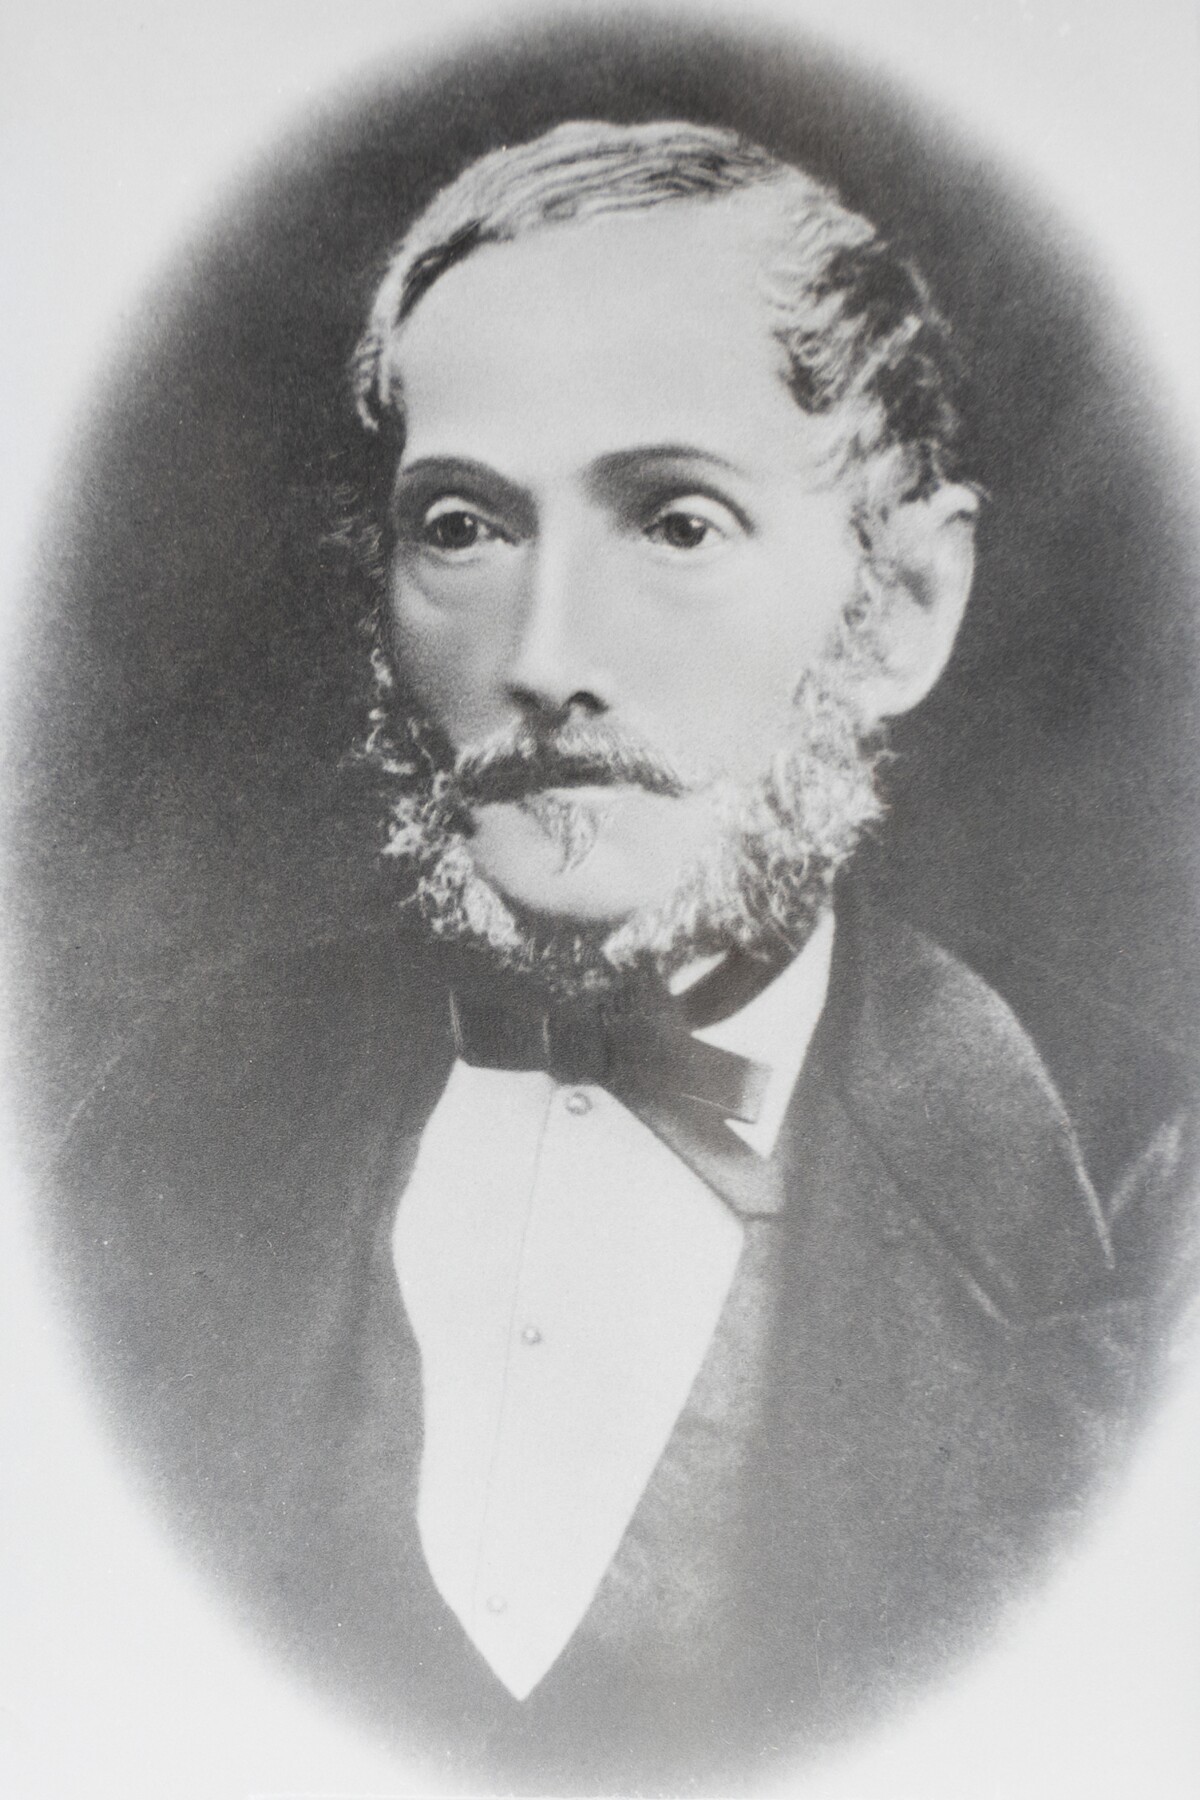 A black and white portrait of a man wearing a suit with a bowtie. 